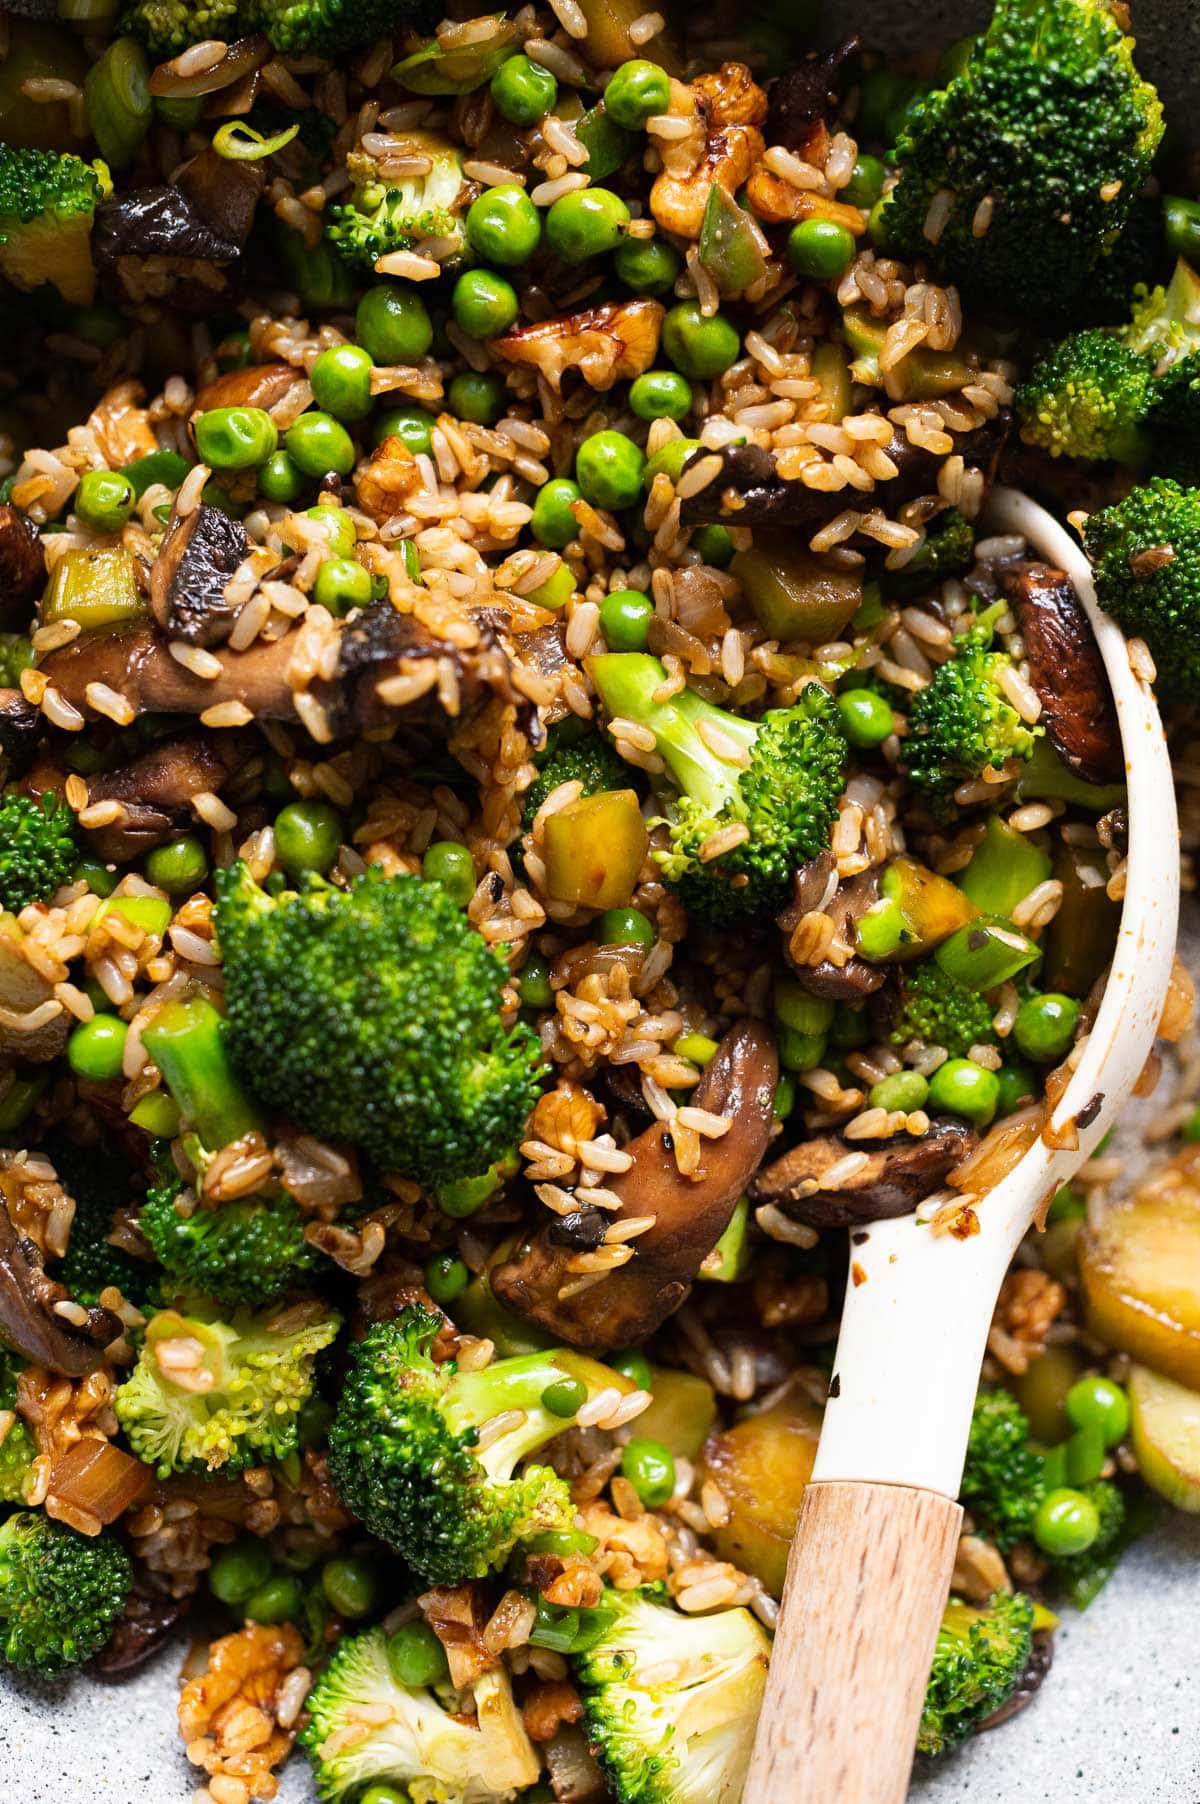 Close up of broccoli and mushroom stir fry recipe with peas, green onions and brown rice.